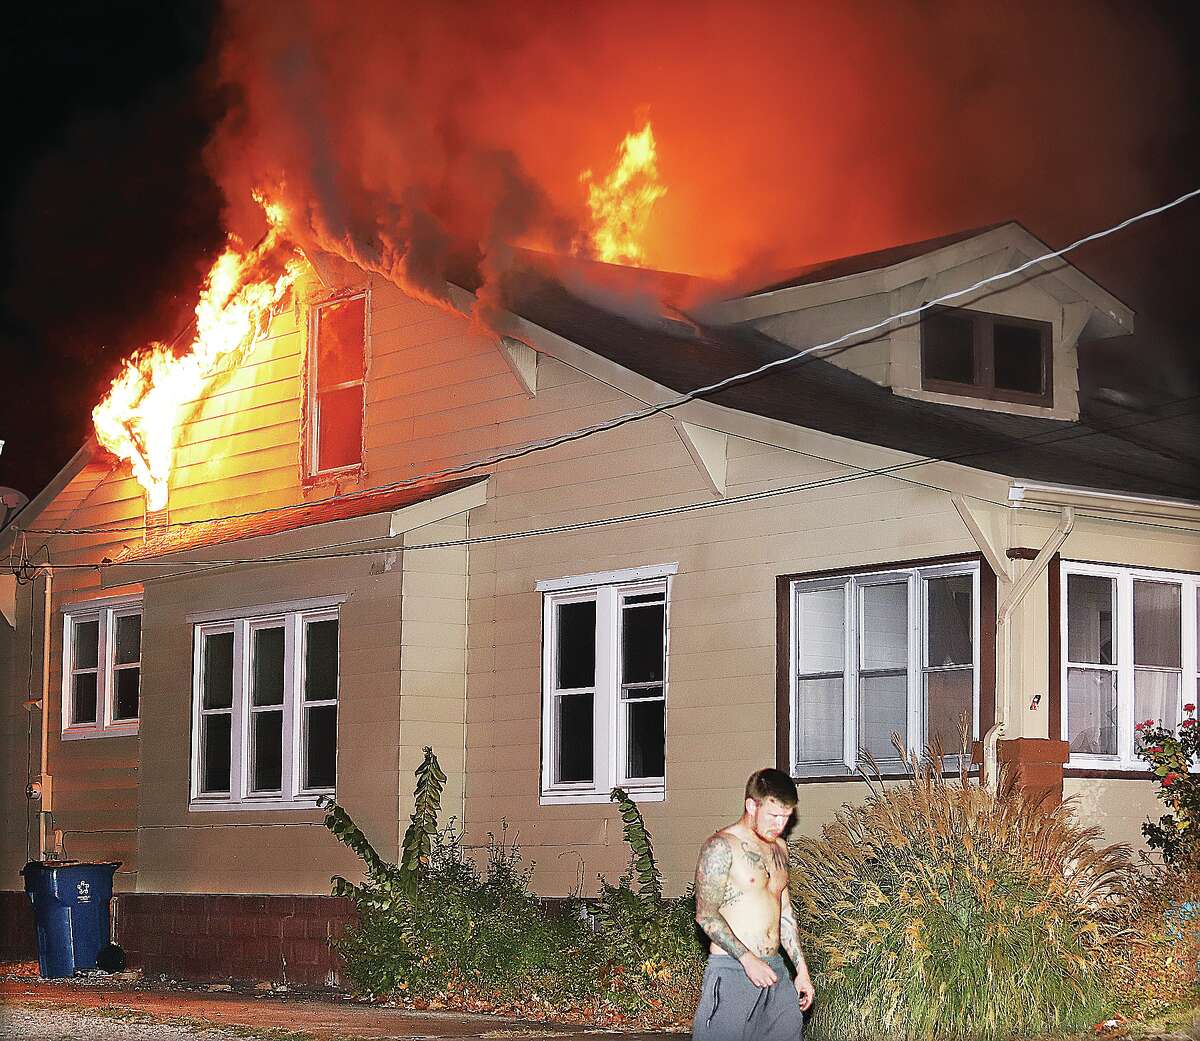 John Badman|The Telegraph Flames roar from the upstairs of a house at 3308 Brown Street in Alton early Friday morning. The house, which is for sale and has been on the market for over a month, suffered extensive damage in the upstairs rear and water and smoke damage throughout.